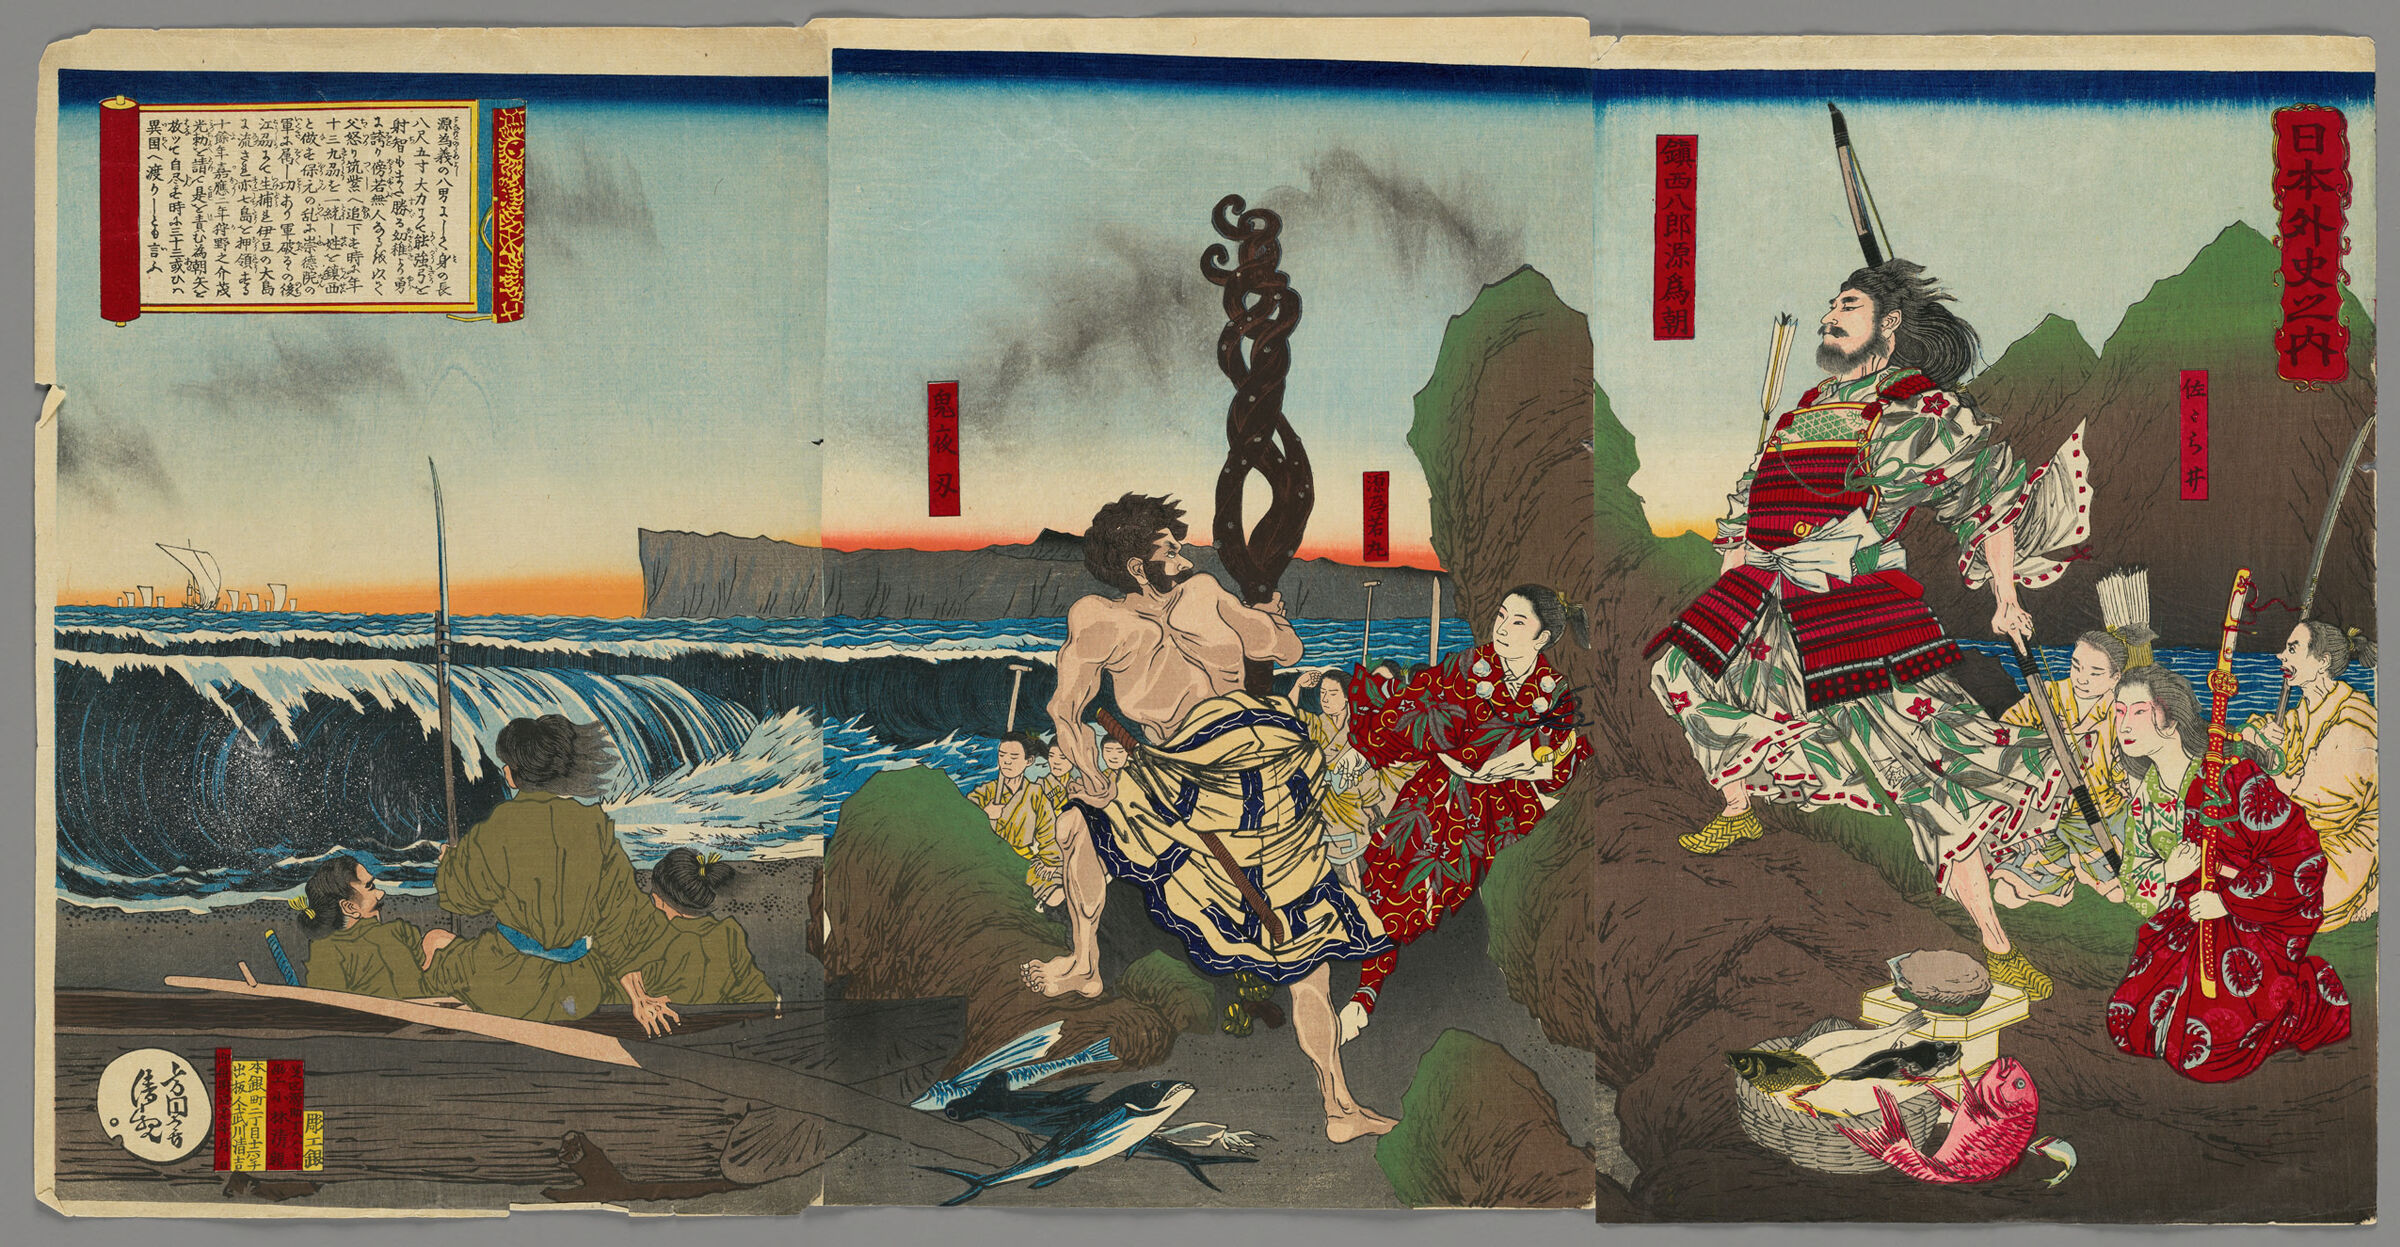 Triptych: Minamoto Tameyoshi's Son Tametomo (1139-1170), From The Series Episodes From Unknown Japanese History (Nihon Gaishi No Uchi)